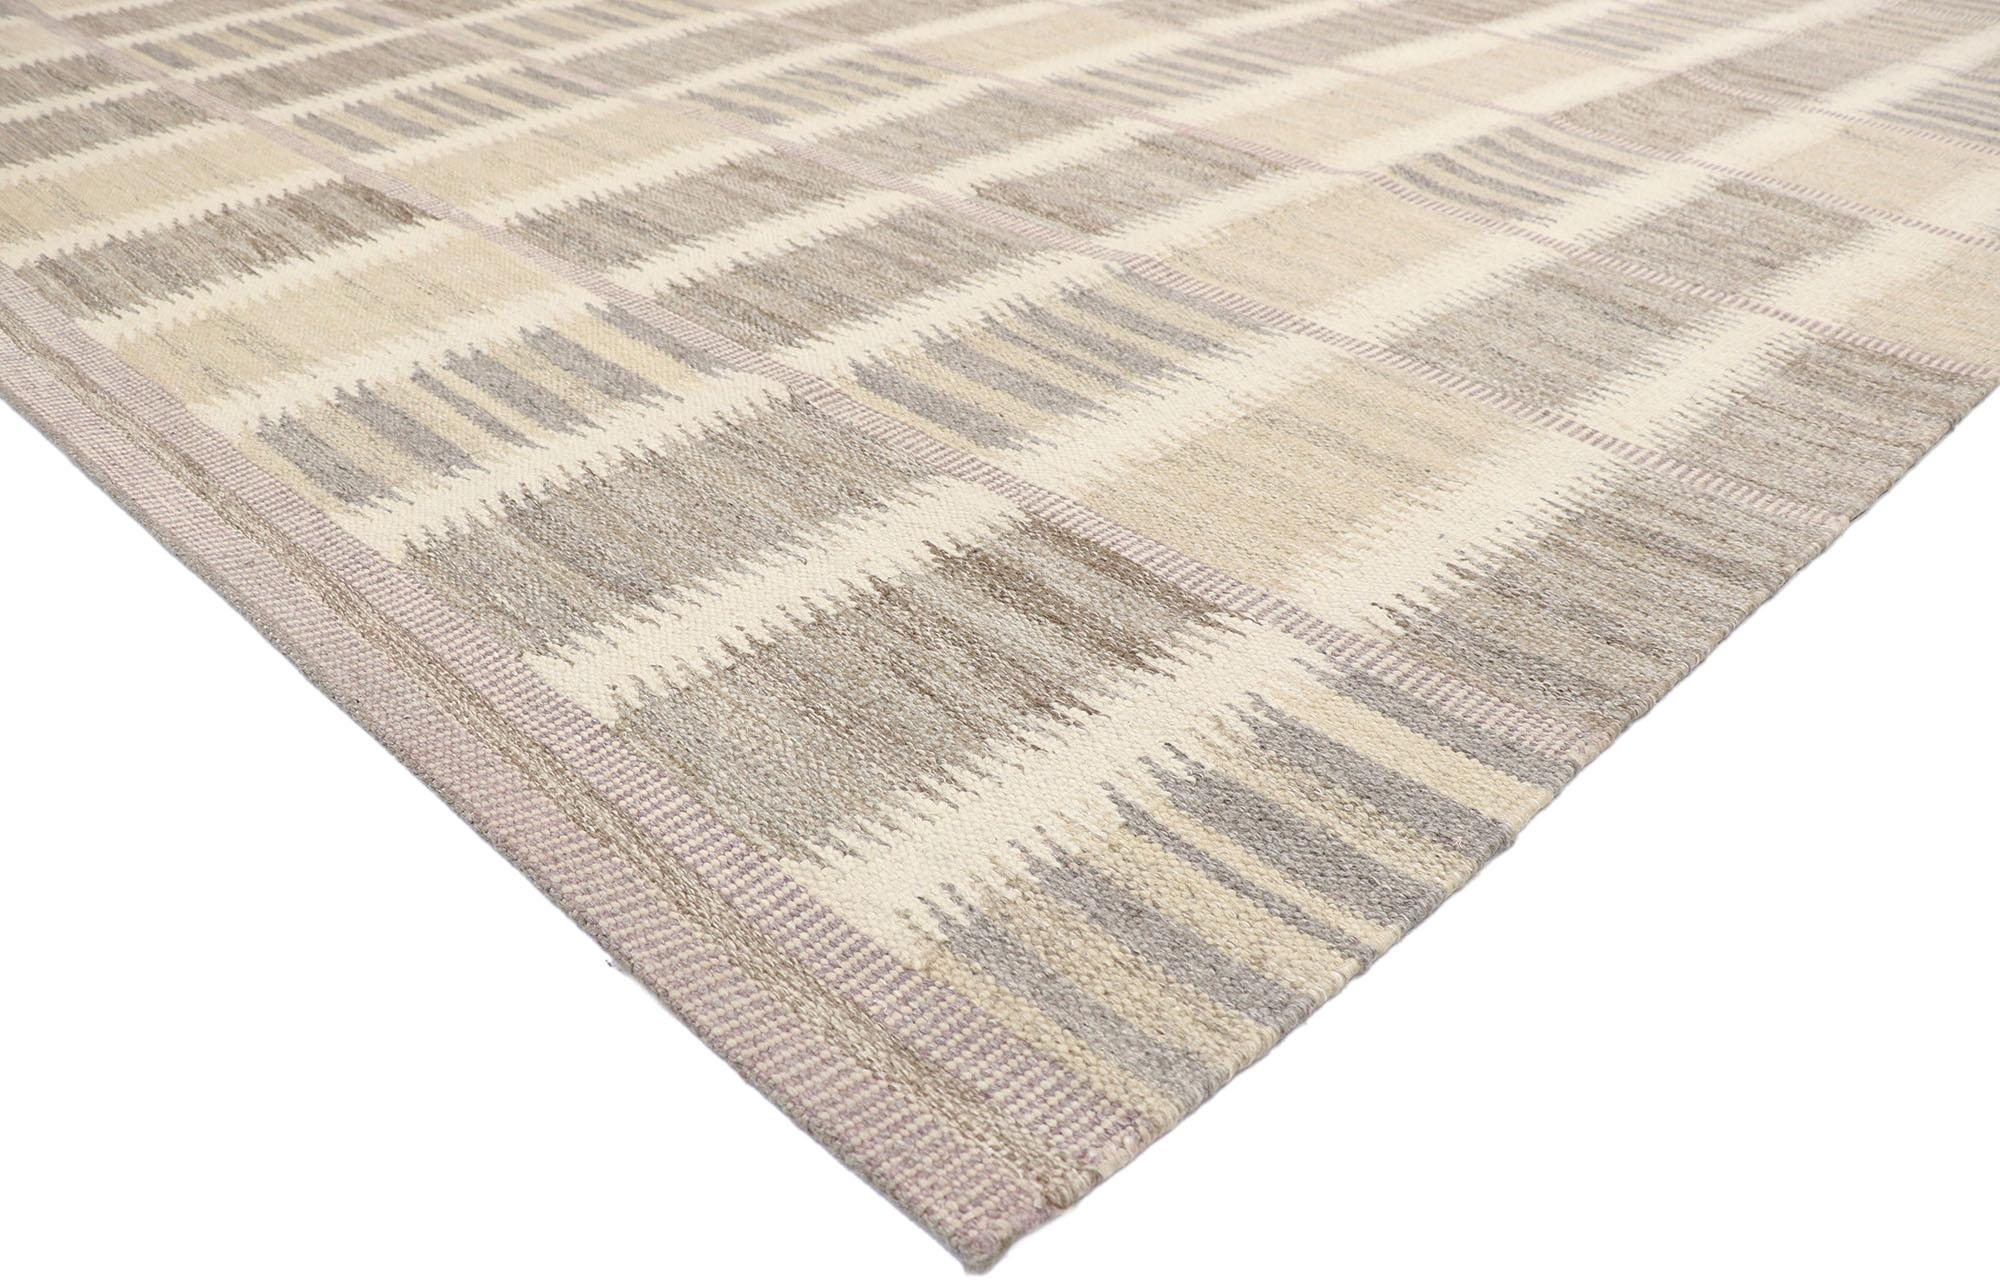 30639, new contemporary Swedish Inspired Kilim rug with Scandinavian modern style 10'06 x 12'09. With its geometric design and bohemian hygge vibes, this hand-woven wool Swedish Indian Kilim rug beautifully embodies the simplicity of Scandinavian